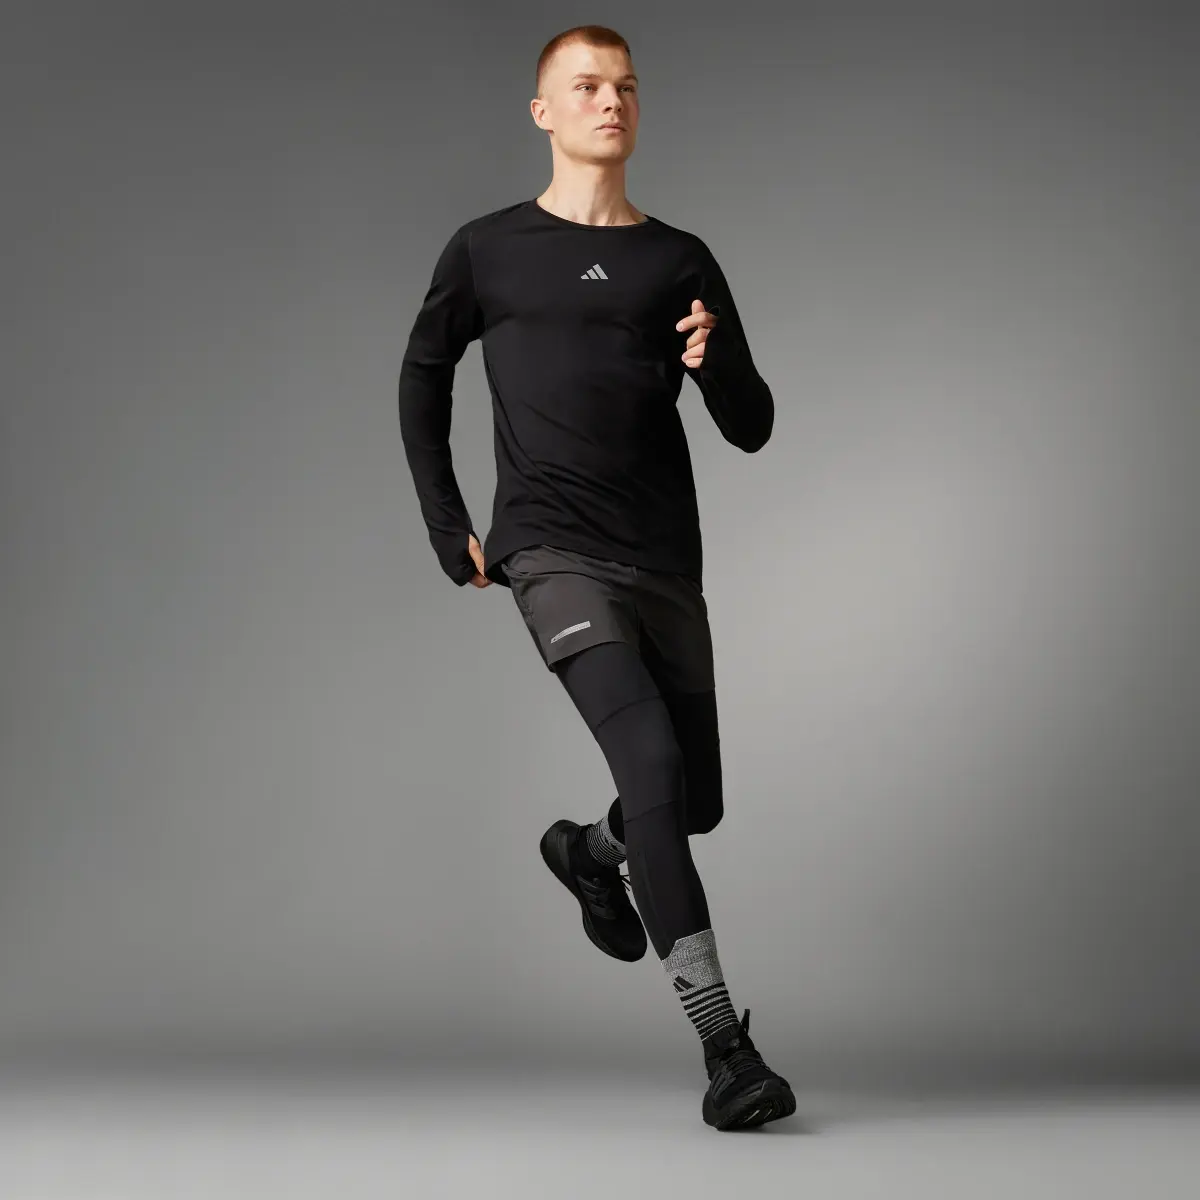 Adidas Ultimate Running Conquer the Elements Merino Longsleeve. 3